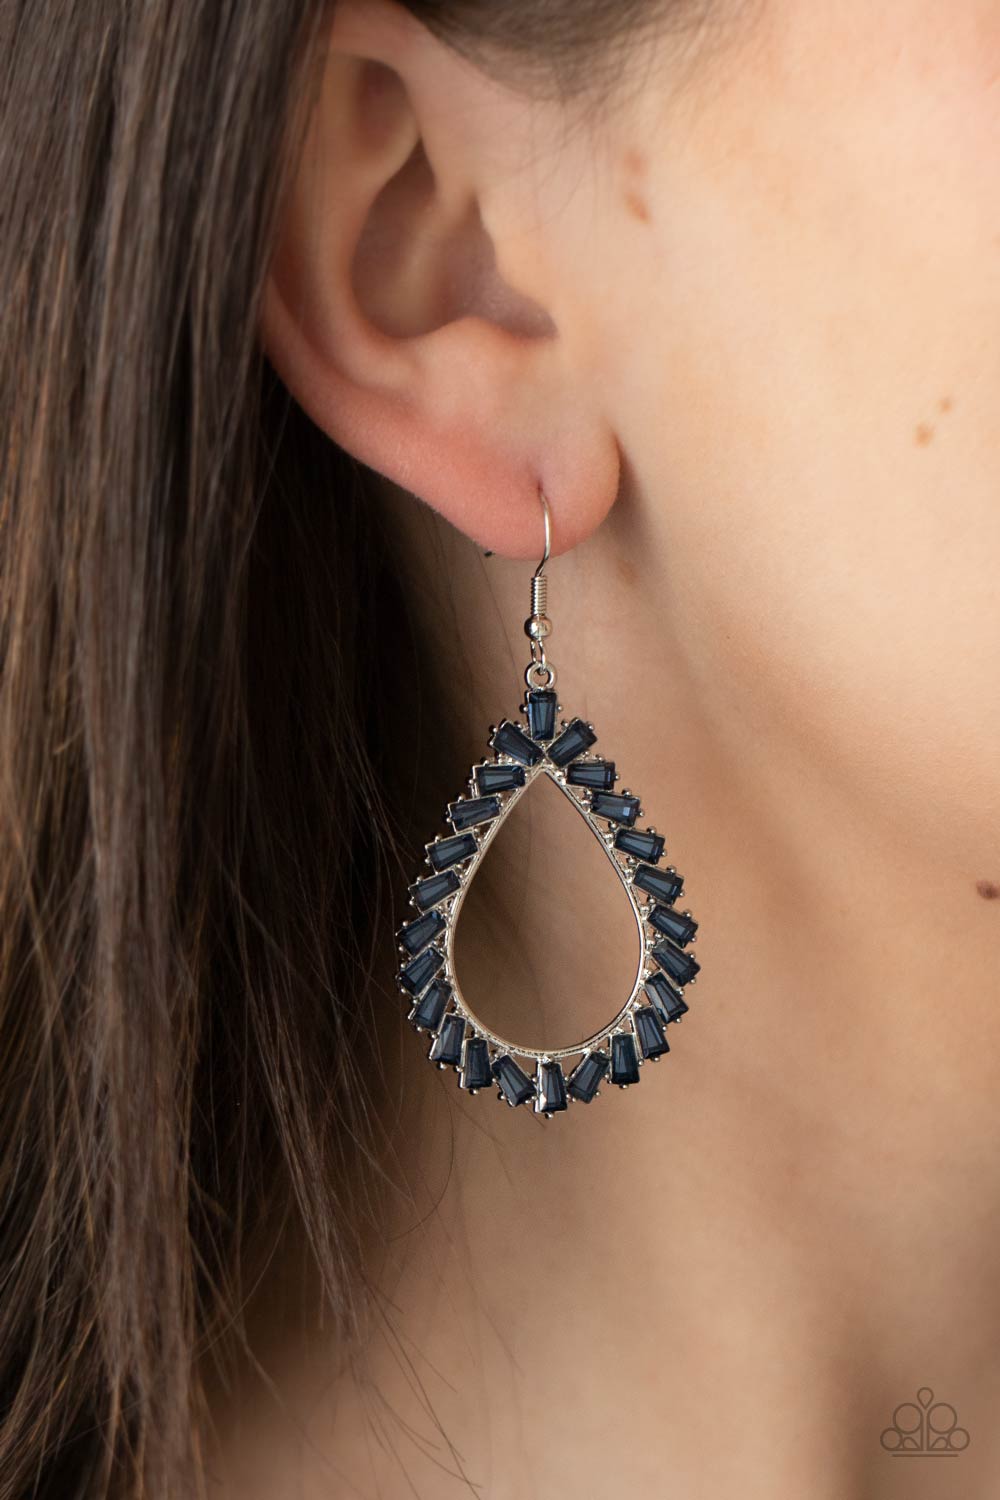 &lt;p&gt;Featuring flared emerald style cuts, a glittery collection of blue gems adorn the front of a silver teardrop for a jaw-dropping dazzle. Earring attaches to a standard fishhook fitting.
  &lt;/p&gt;  
 

 &lt;p&gt; &lt;i&gt; Sold as one pair of earrings. &lt;/i&gt; &lt;/p&gt;
 

 

&lt;h5&gt;Paparazzi Accessories • $5 Jewelry&lt;/h5&gt;